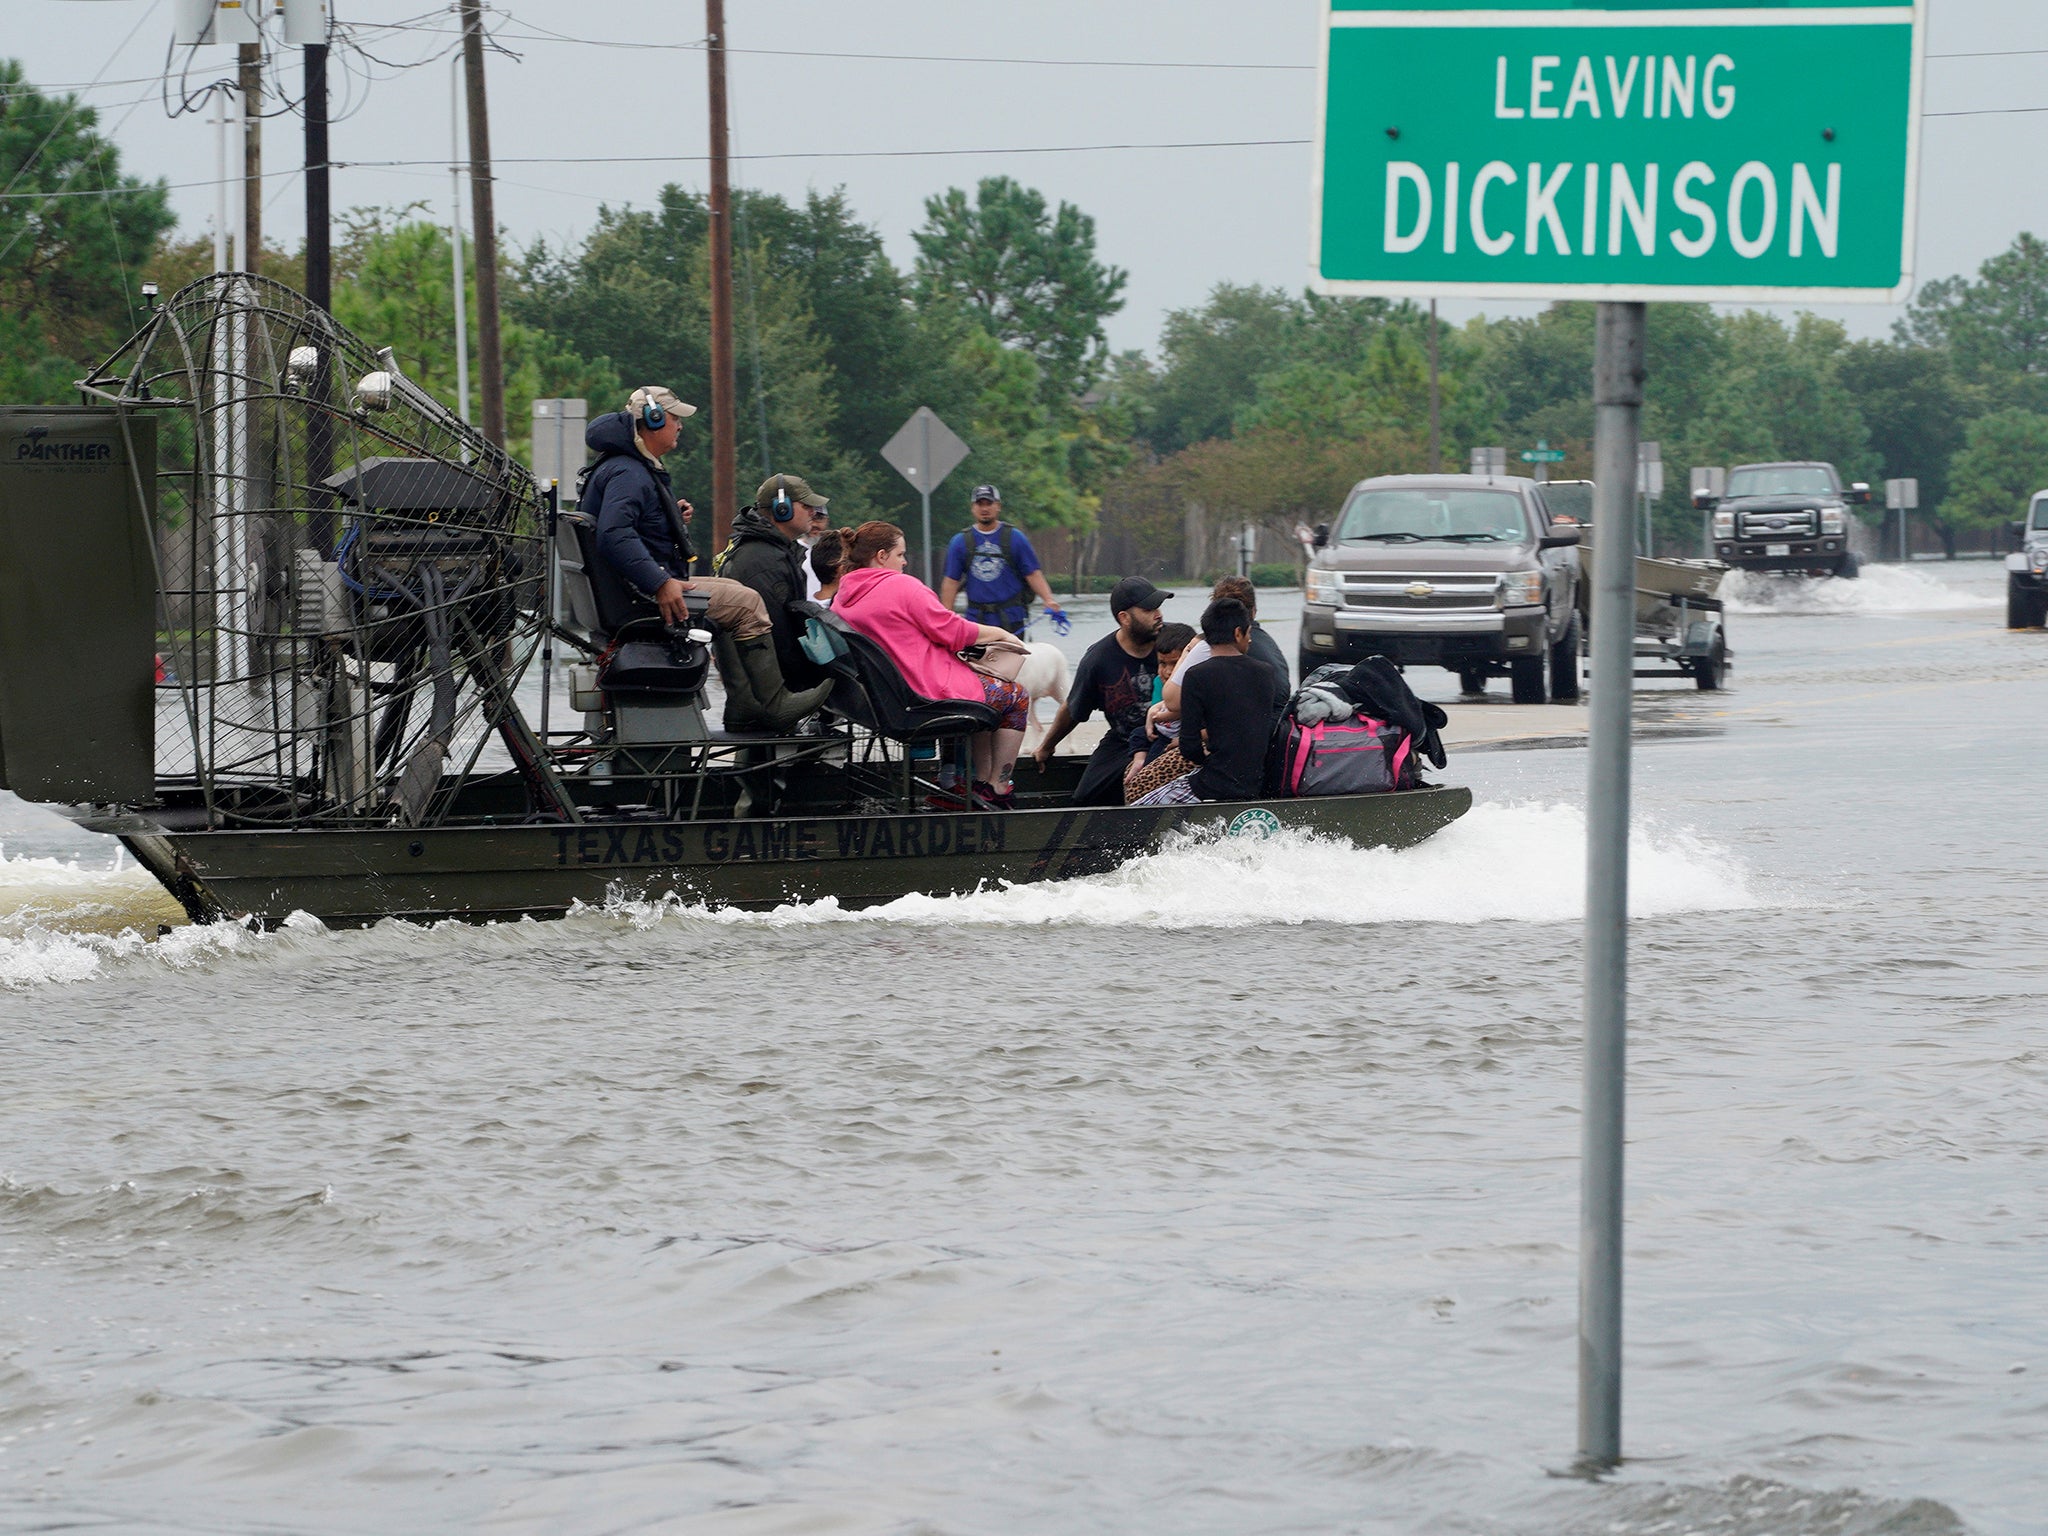 People are rescued by airboat as they evacuate from flood waters after Hurricane Harvey in Dickinson, Texas, in August